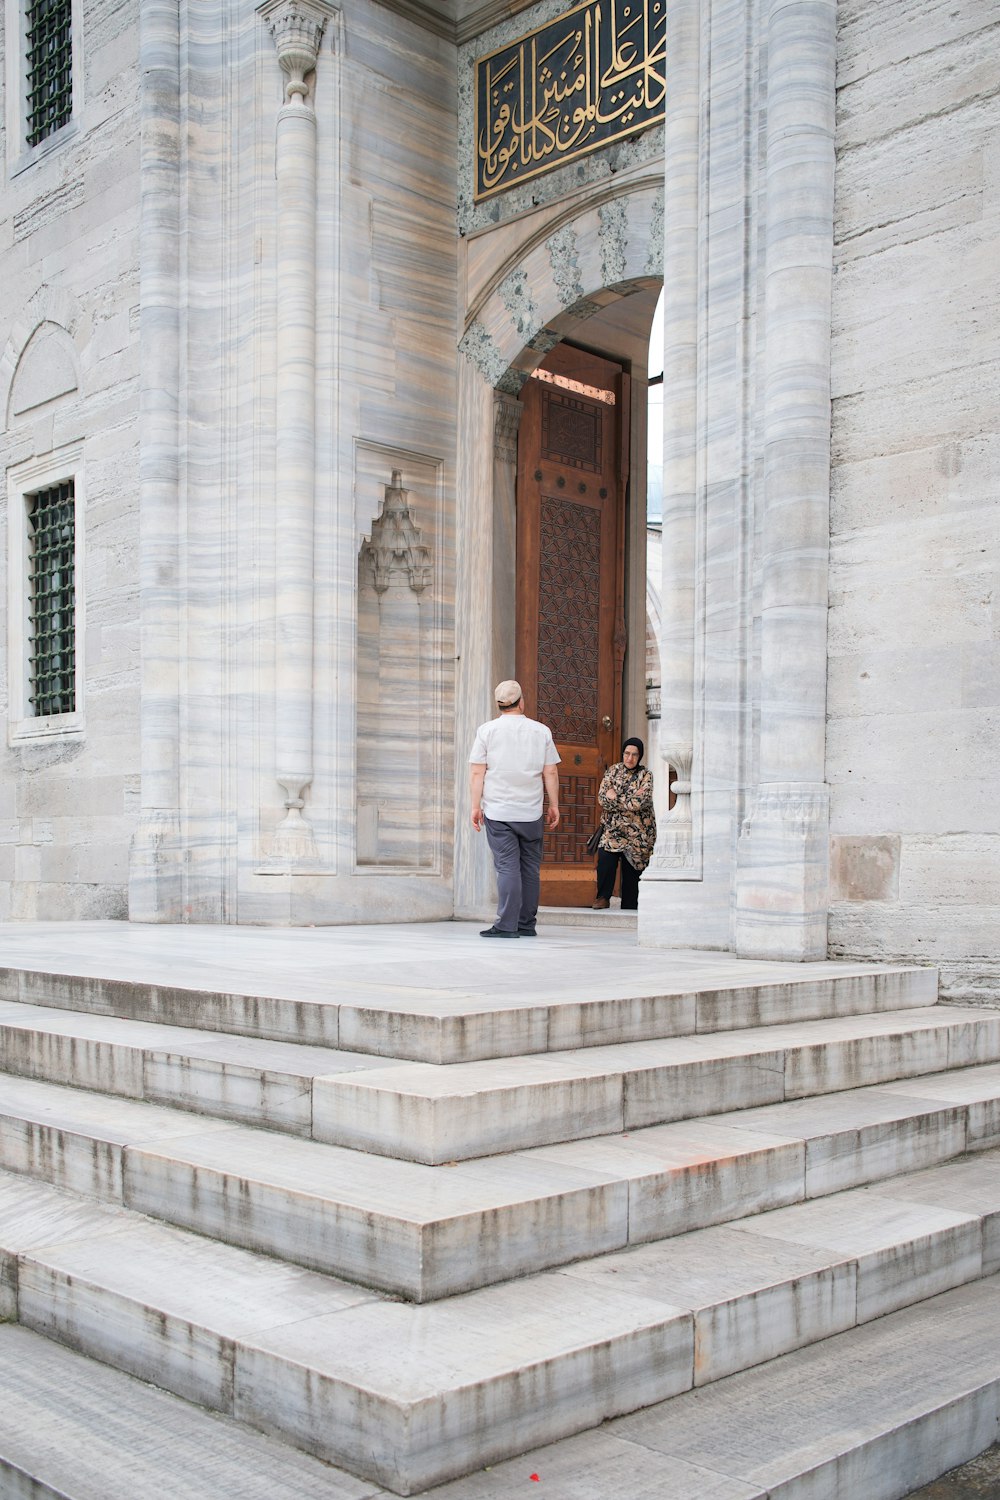 a man and a woman are standing on the steps of a building